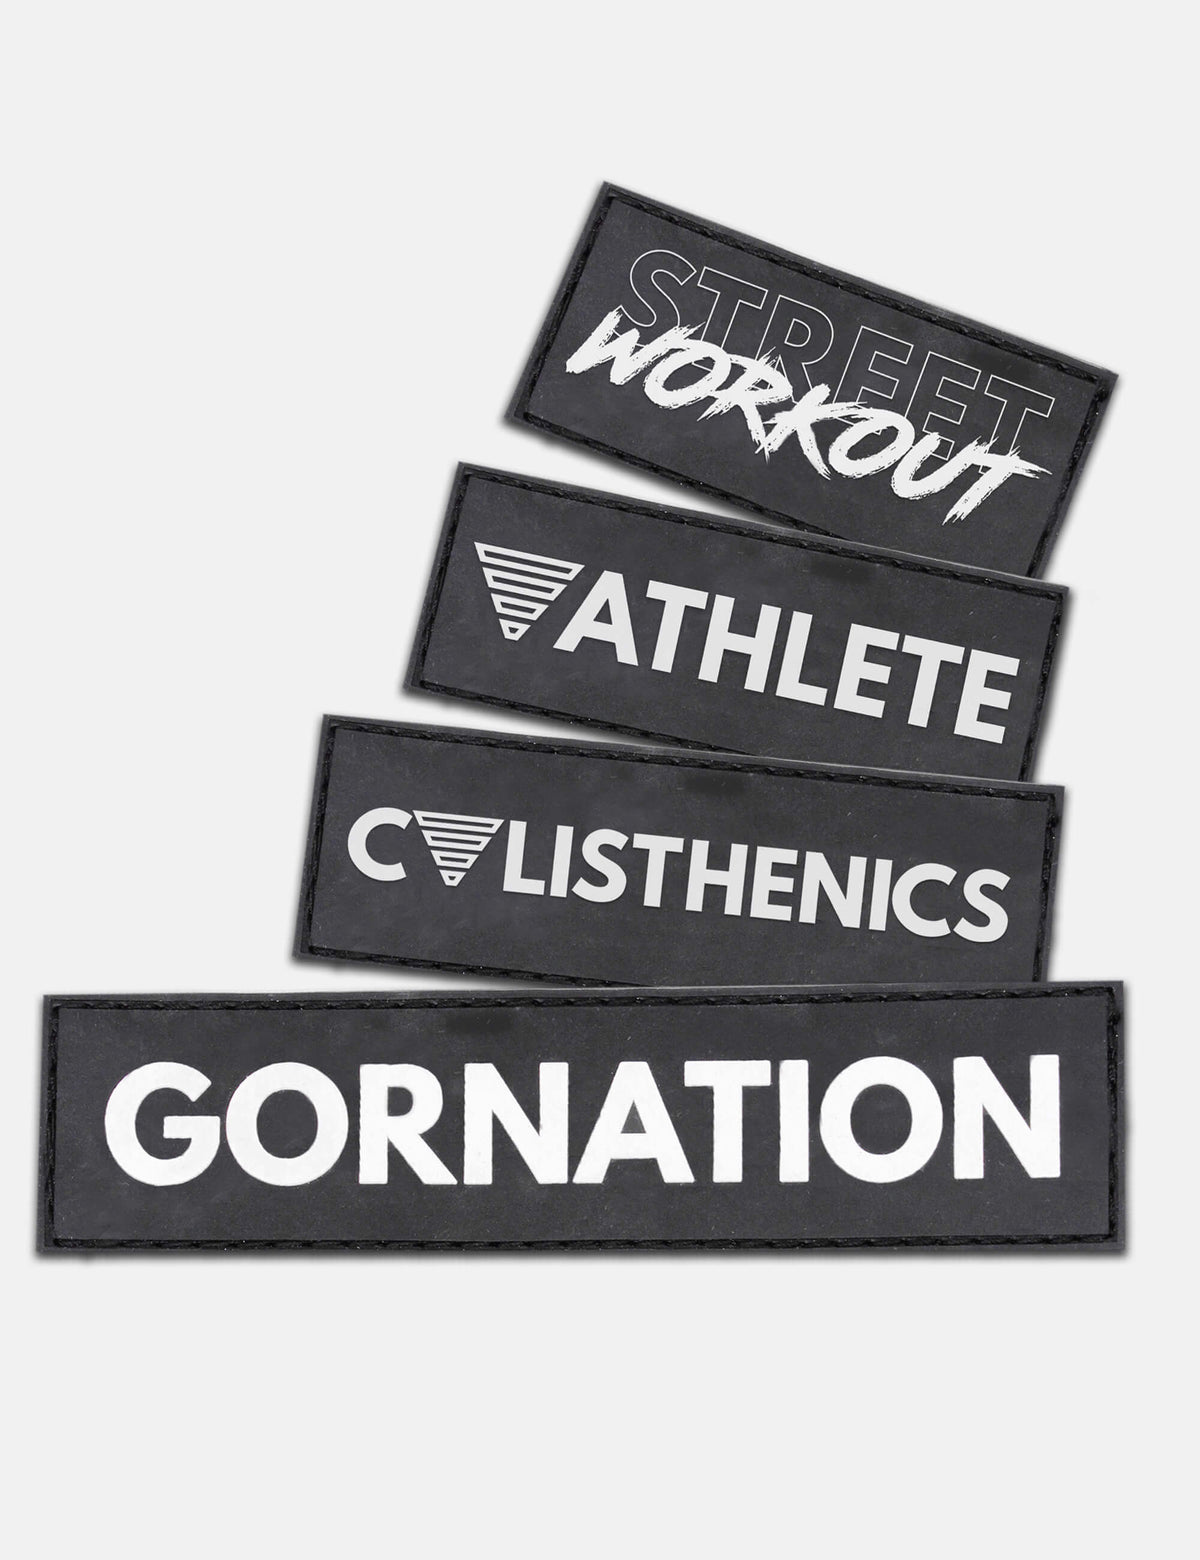 Patches for Backpack or Weight Vest. Calisthenics, GORNATION, Street Workout & Athlete